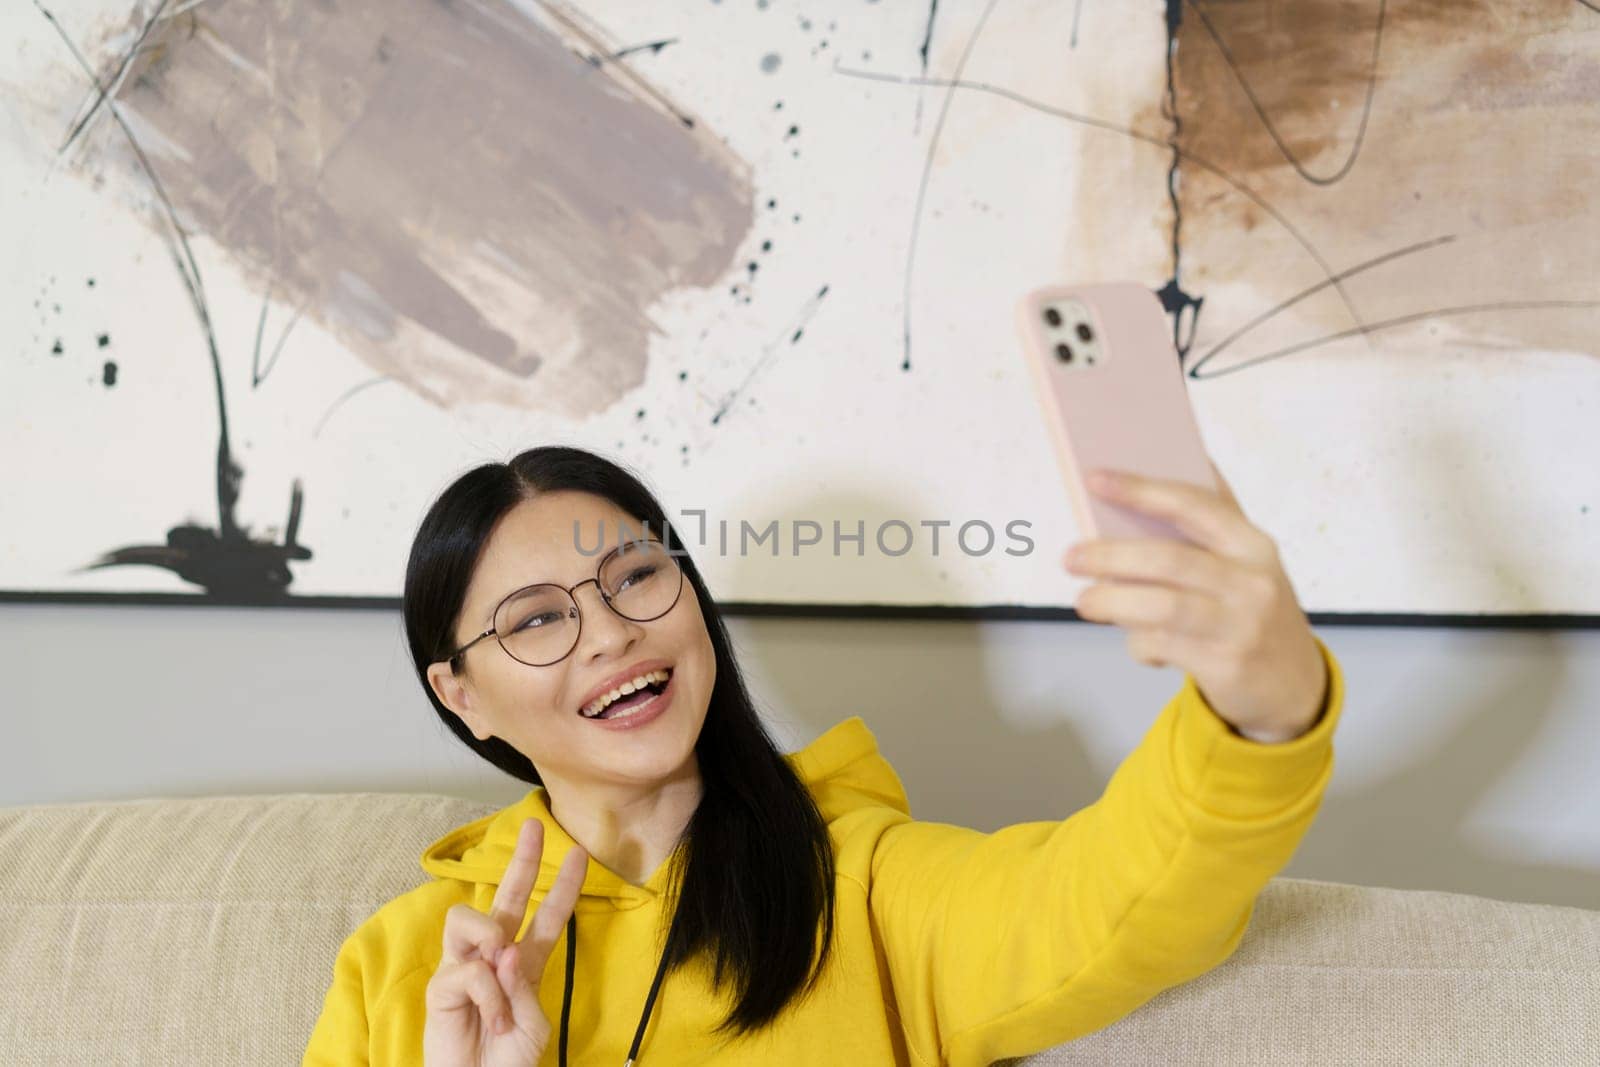 Asian student takes selfie with smartphone, utilizing the latest in mobile photography and communication technology. With glasses on, she captures self-portrait to share on social media or with friends online. by LipikStockMedia